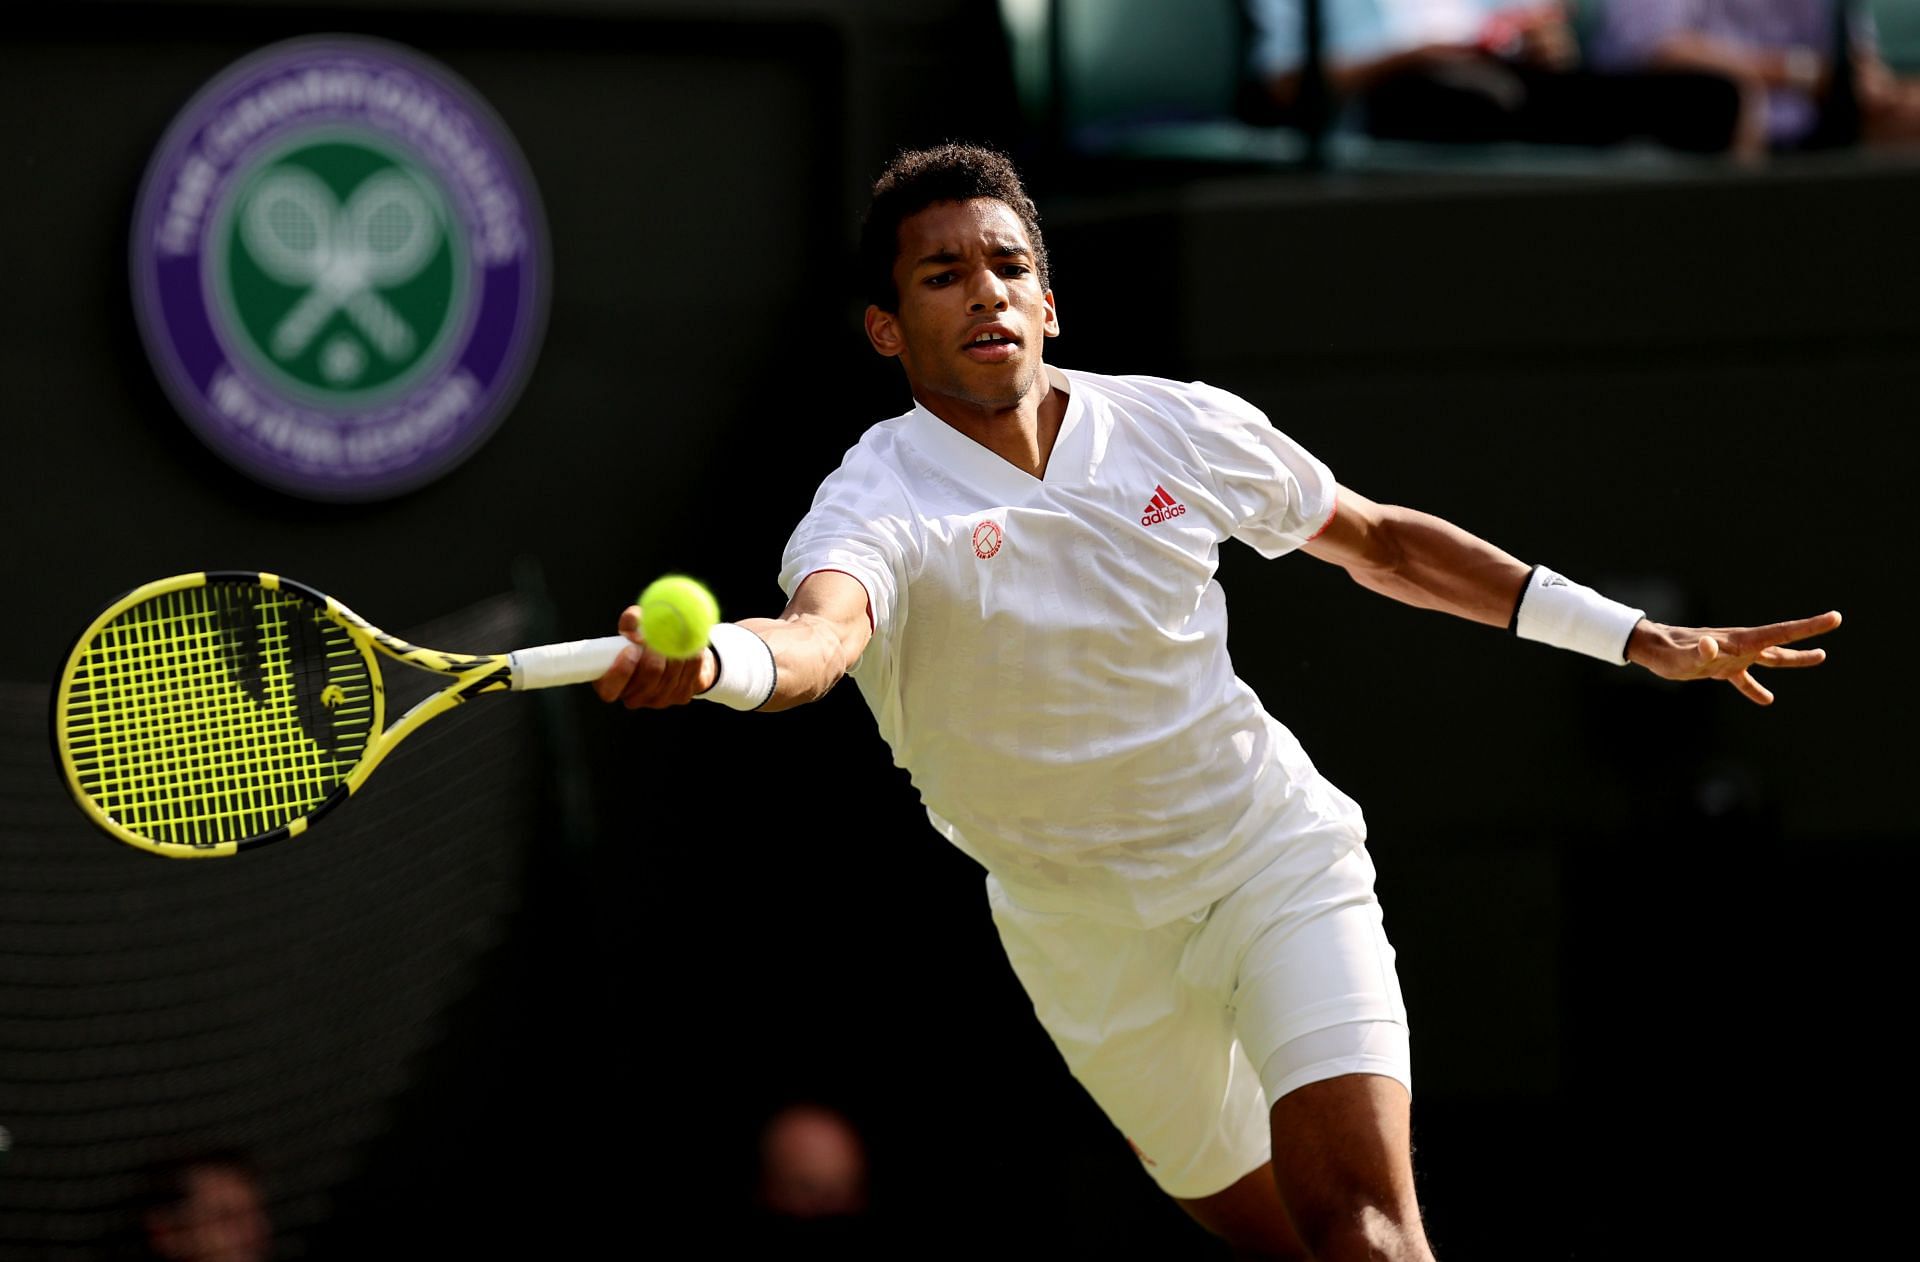 Felix Auger-Aliassime reached a Grand Slam quarterfinal for the first time at Wimbledon last year